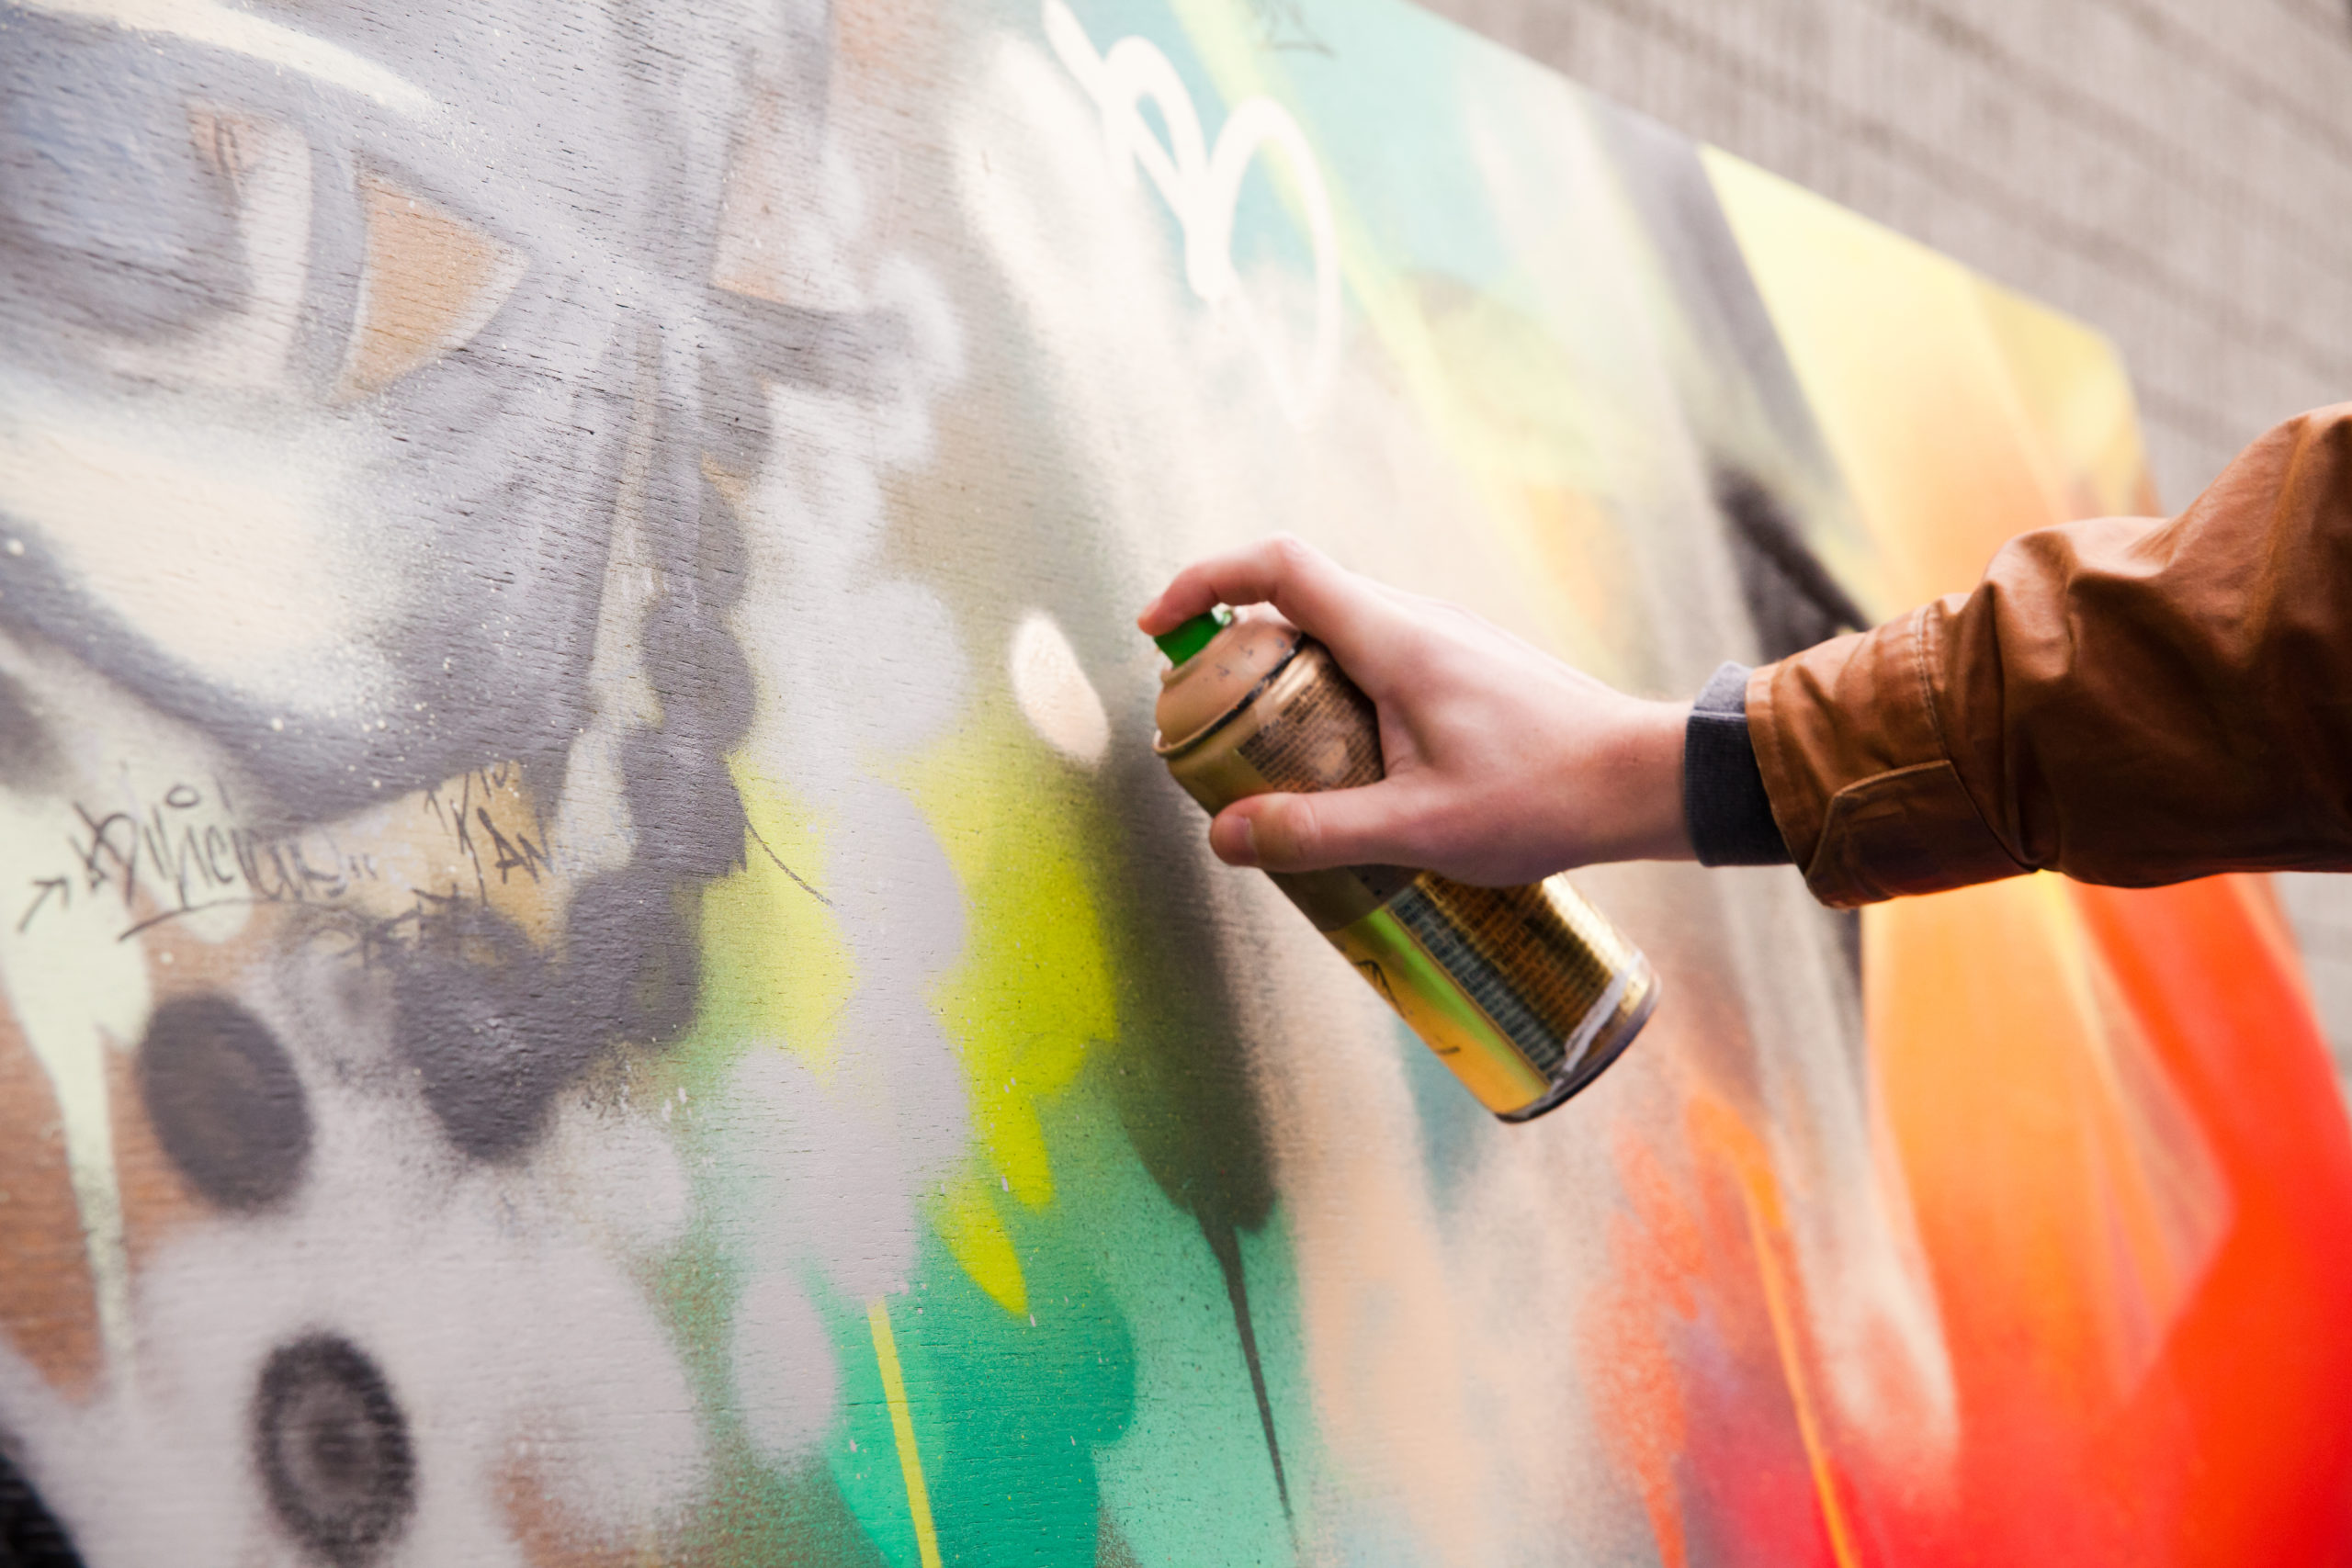 Photo of a arm holding a spray paint can painting a mural with colours of green, orange and yellow